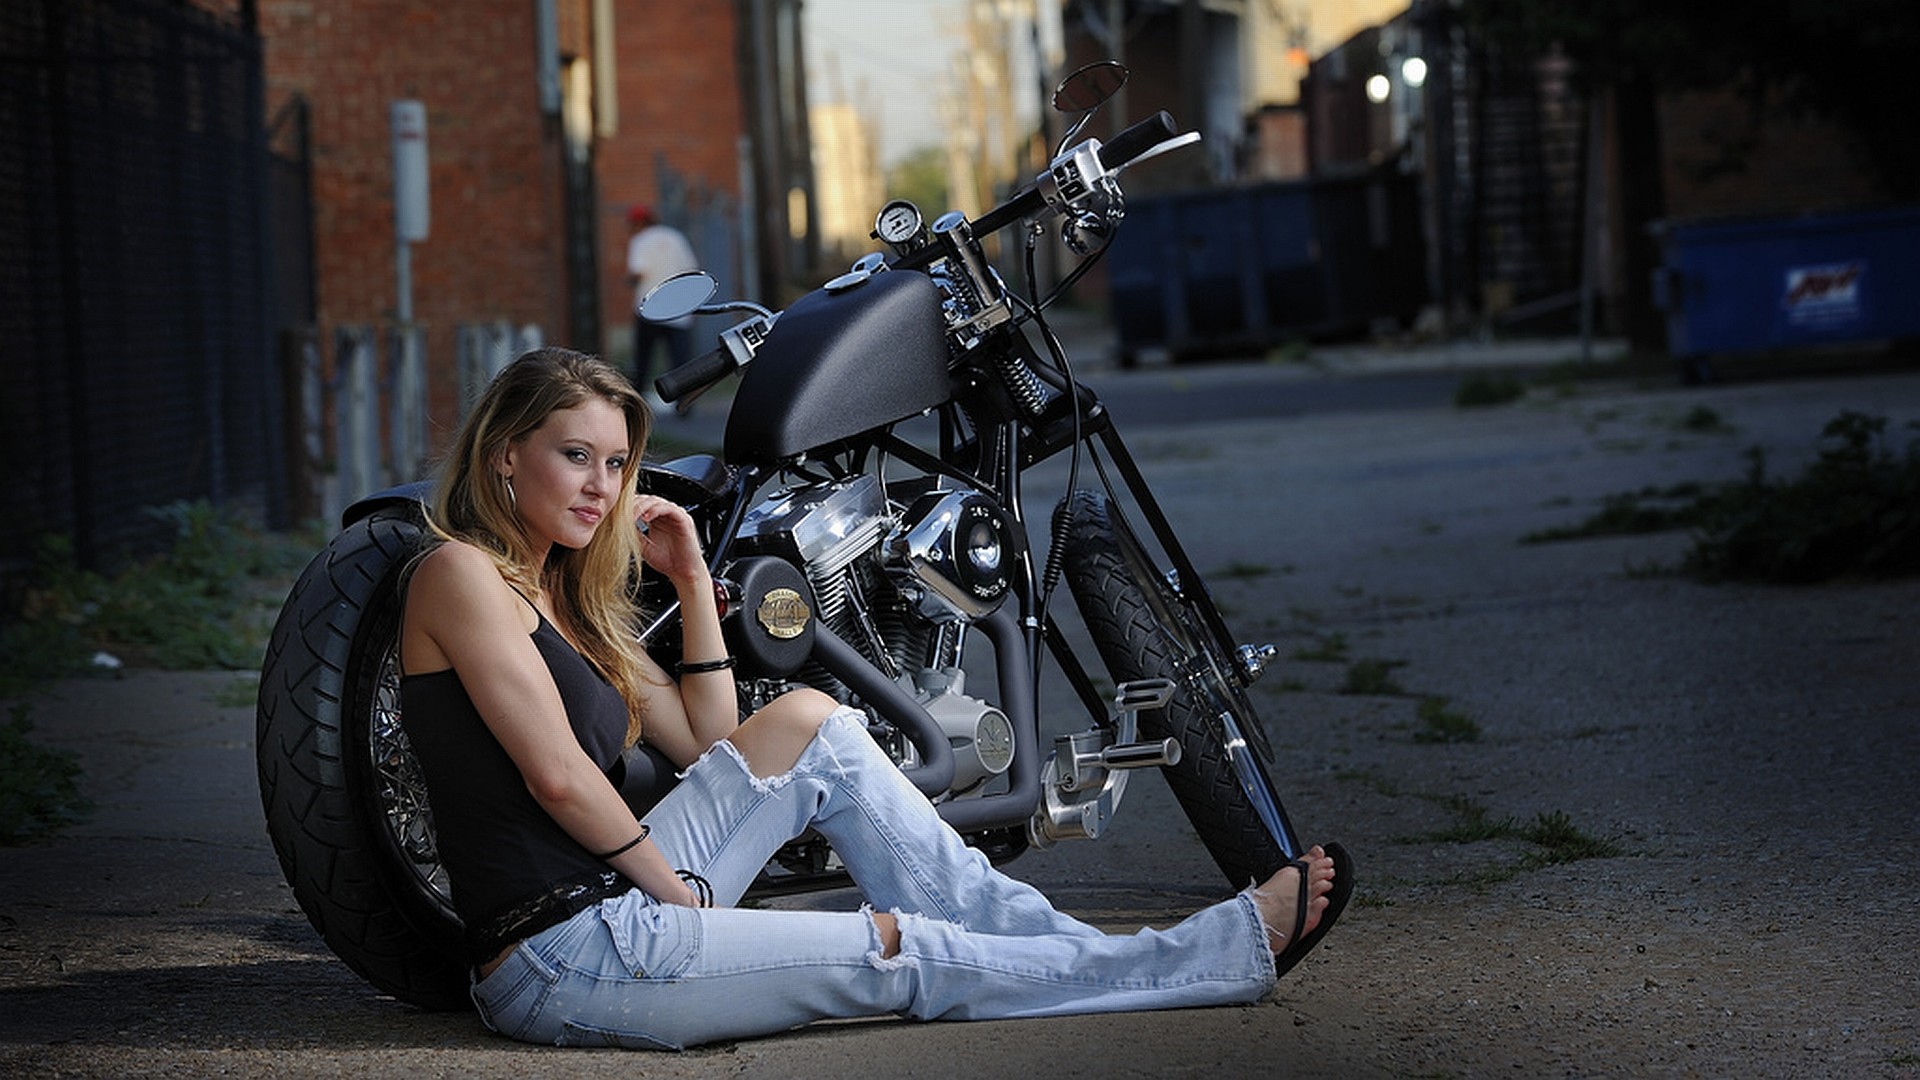 1920x1080 Abyss Everything Motorcycles Vehicles Girls & Motorcycles 168343